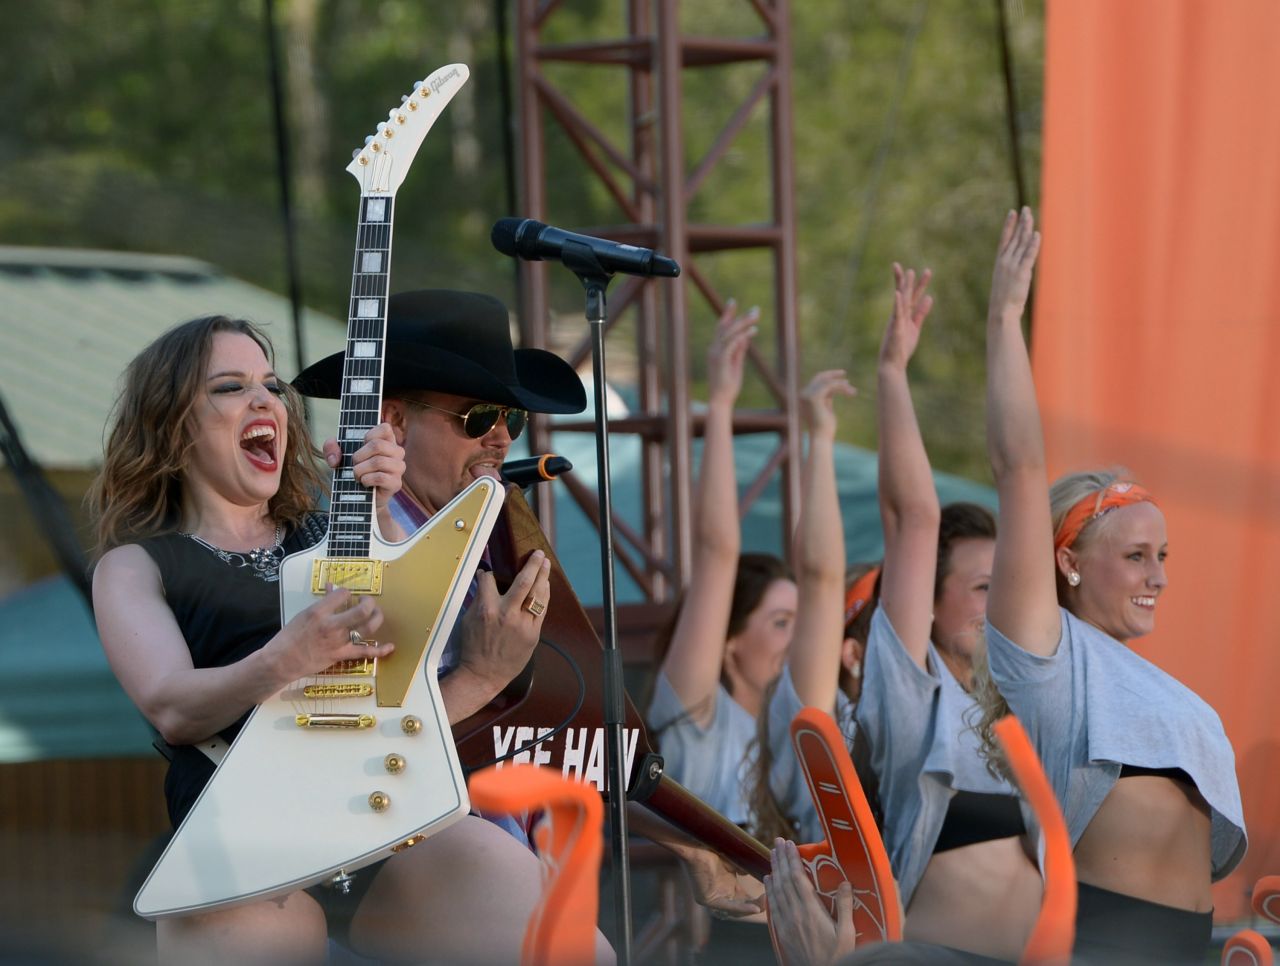 lzzy-hale-big-rich-tape-espn-gameday-opening-may-2014_1.jpg